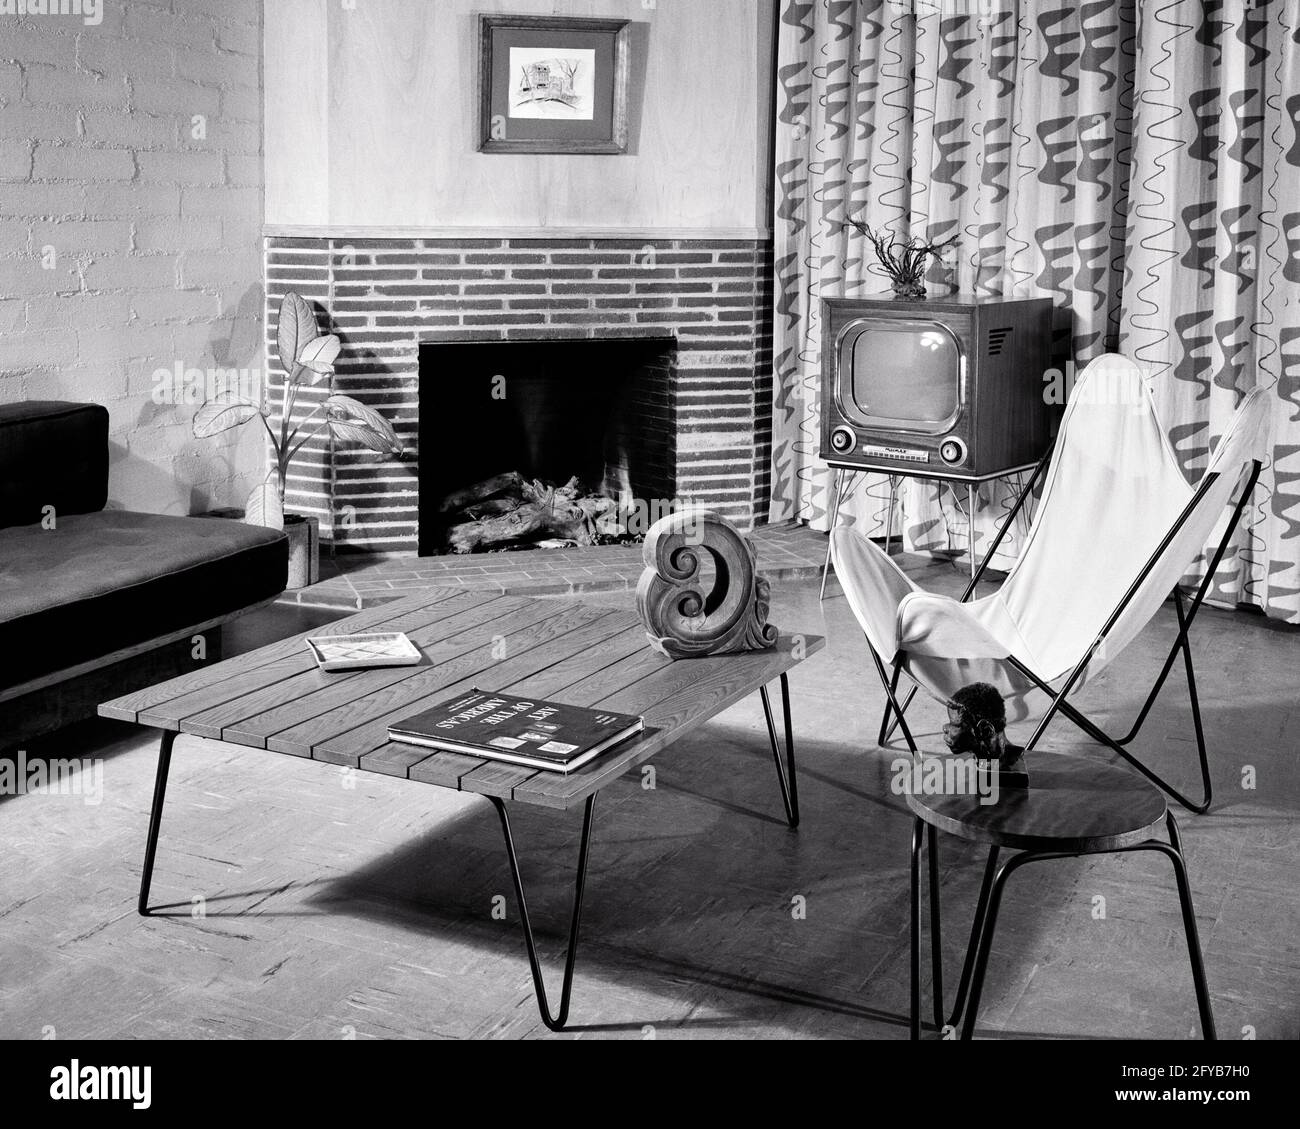 1940s 1950s 1960s LIVING ROOM COFFEE TABLE COUCH BRICK FIREPLACE TELEVISION FABRIC DRAPES A KNOLL HARDOY BKF BUTTERFLY CHAIR - asp ap12608 ASP001 HARS DRAPES INNOVATION CONNECTION STILL LIFE INTERIOR DESIGN POPULAR STYLISH FURNISHING COOPERATION CREATIVITY GRAPHIC DESIGN HOME DECOR KNOLL URBAN DEVELOPMENT BLACK AND WHITE FURNISHINGS OLD FASHIONED Stock Photo